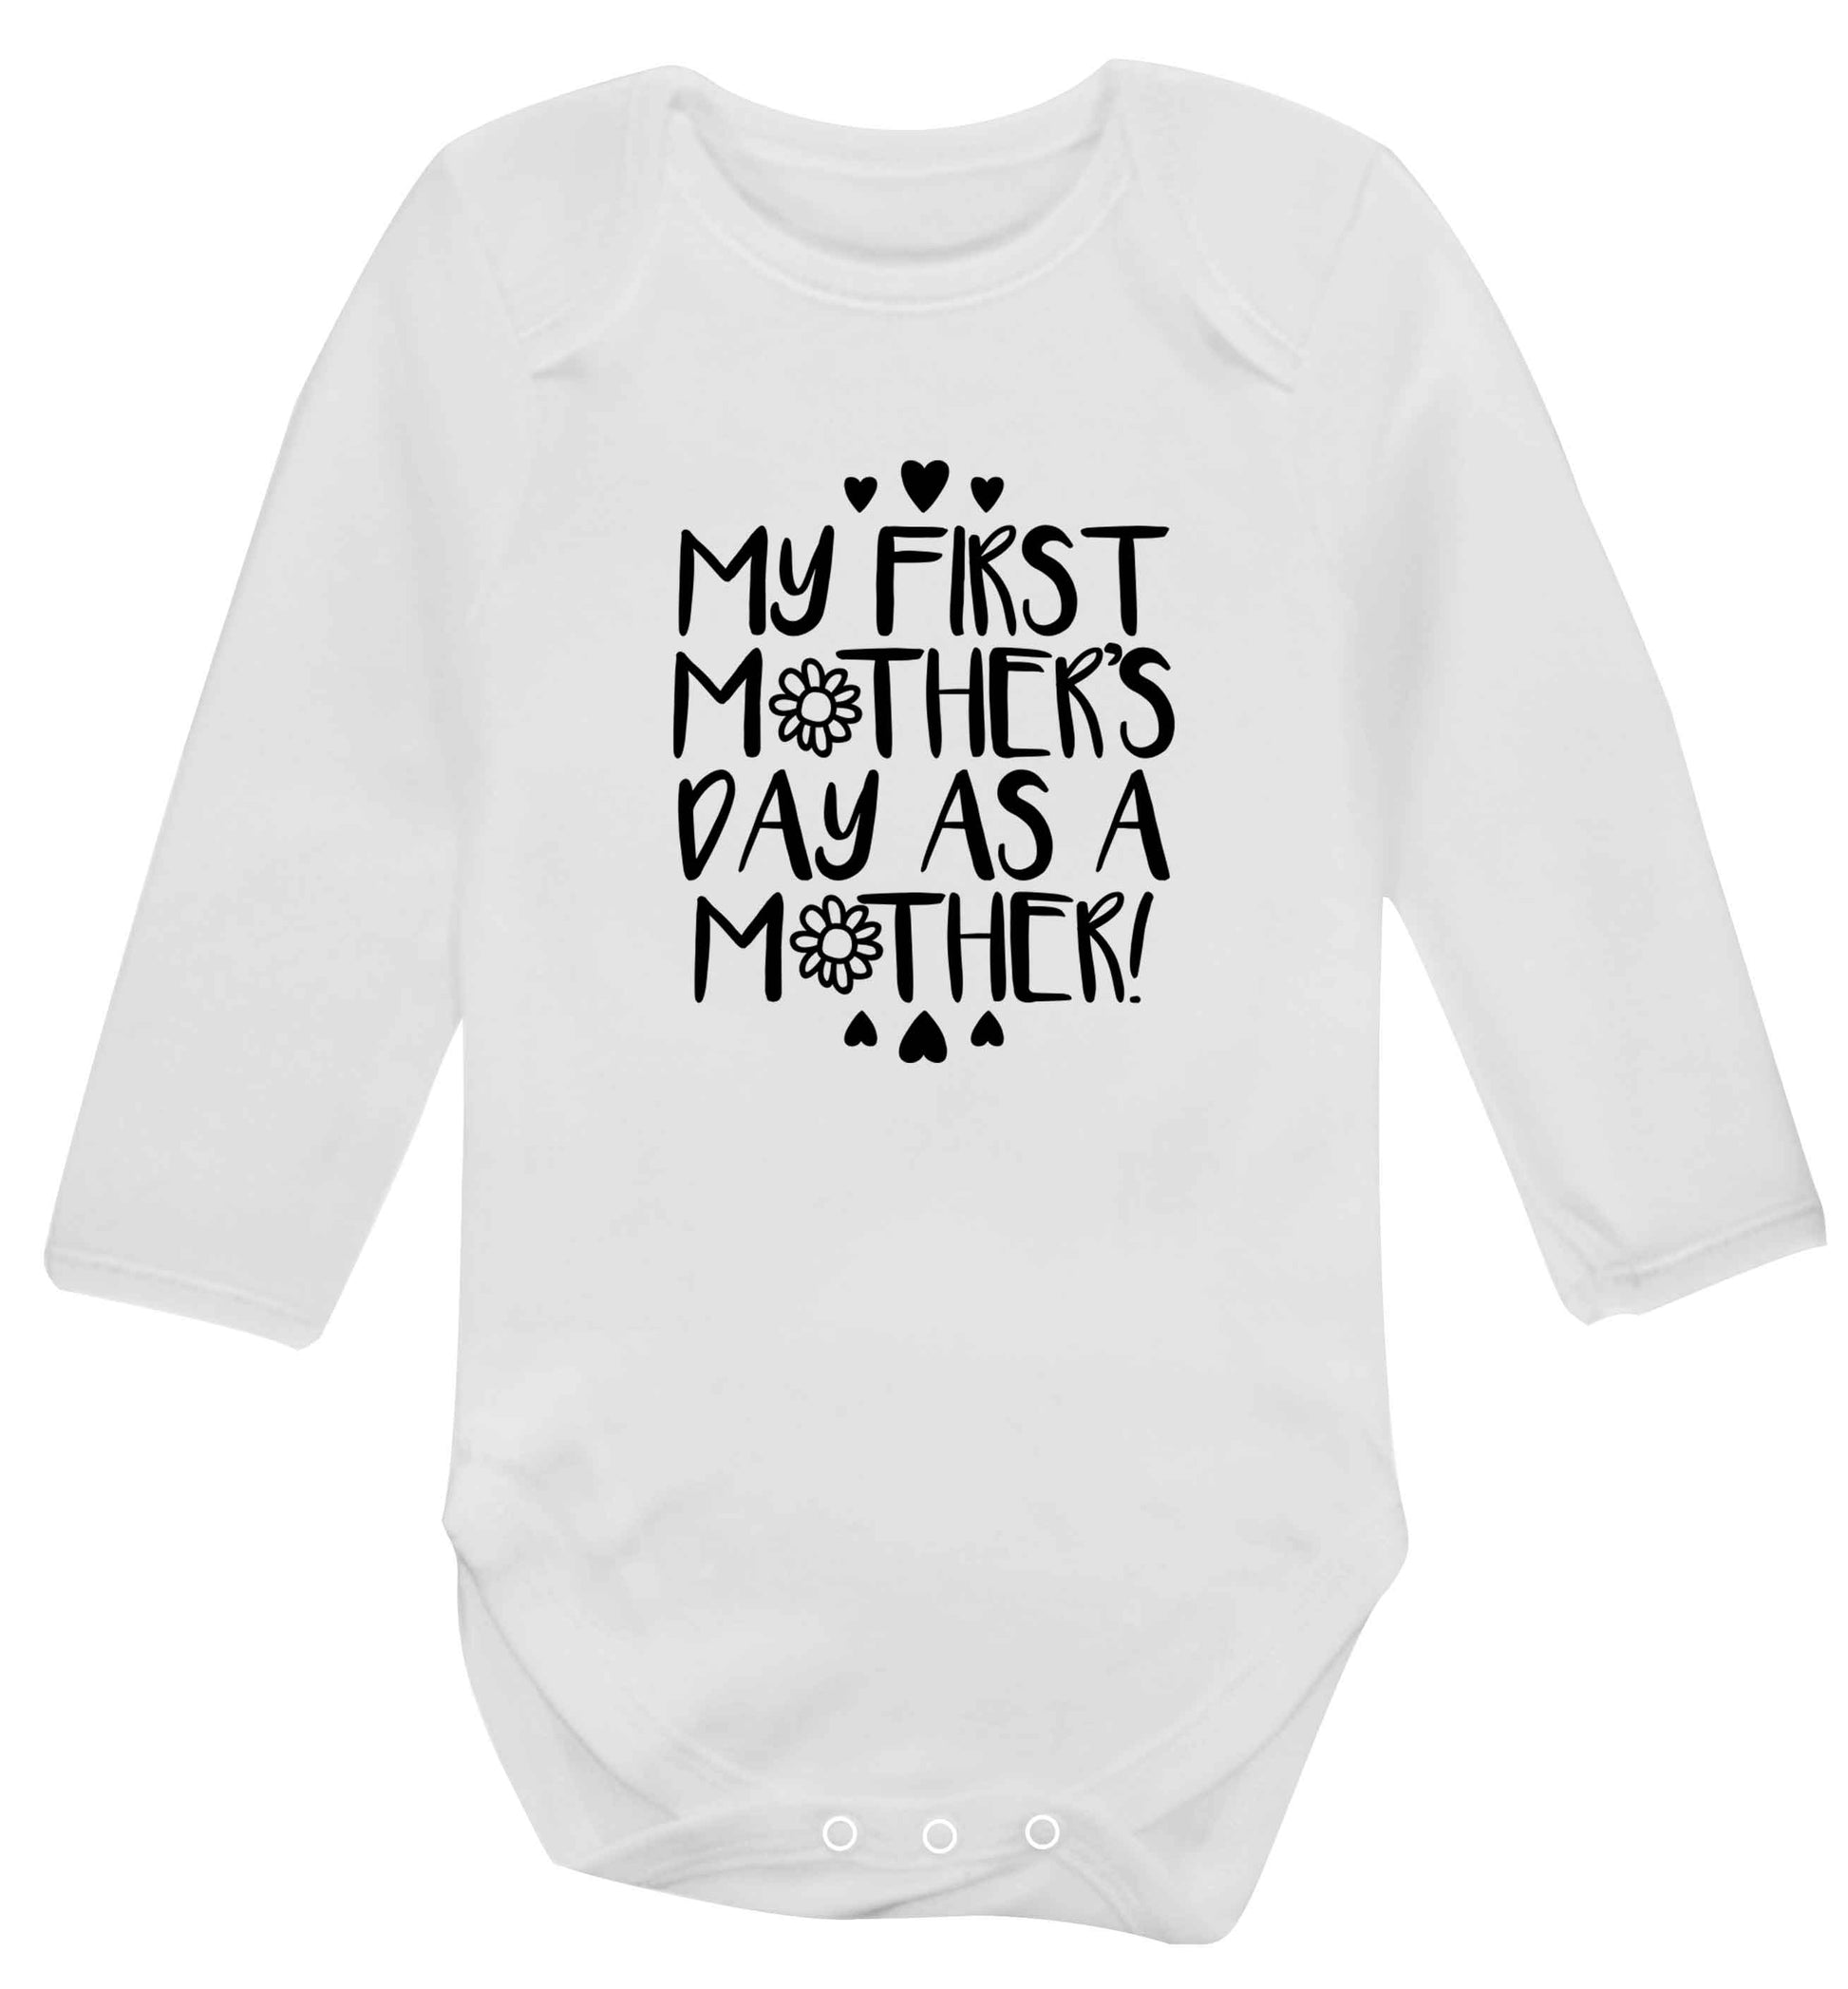 It's my first mother's day as a mother baby vest long sleeved white 6-12 months